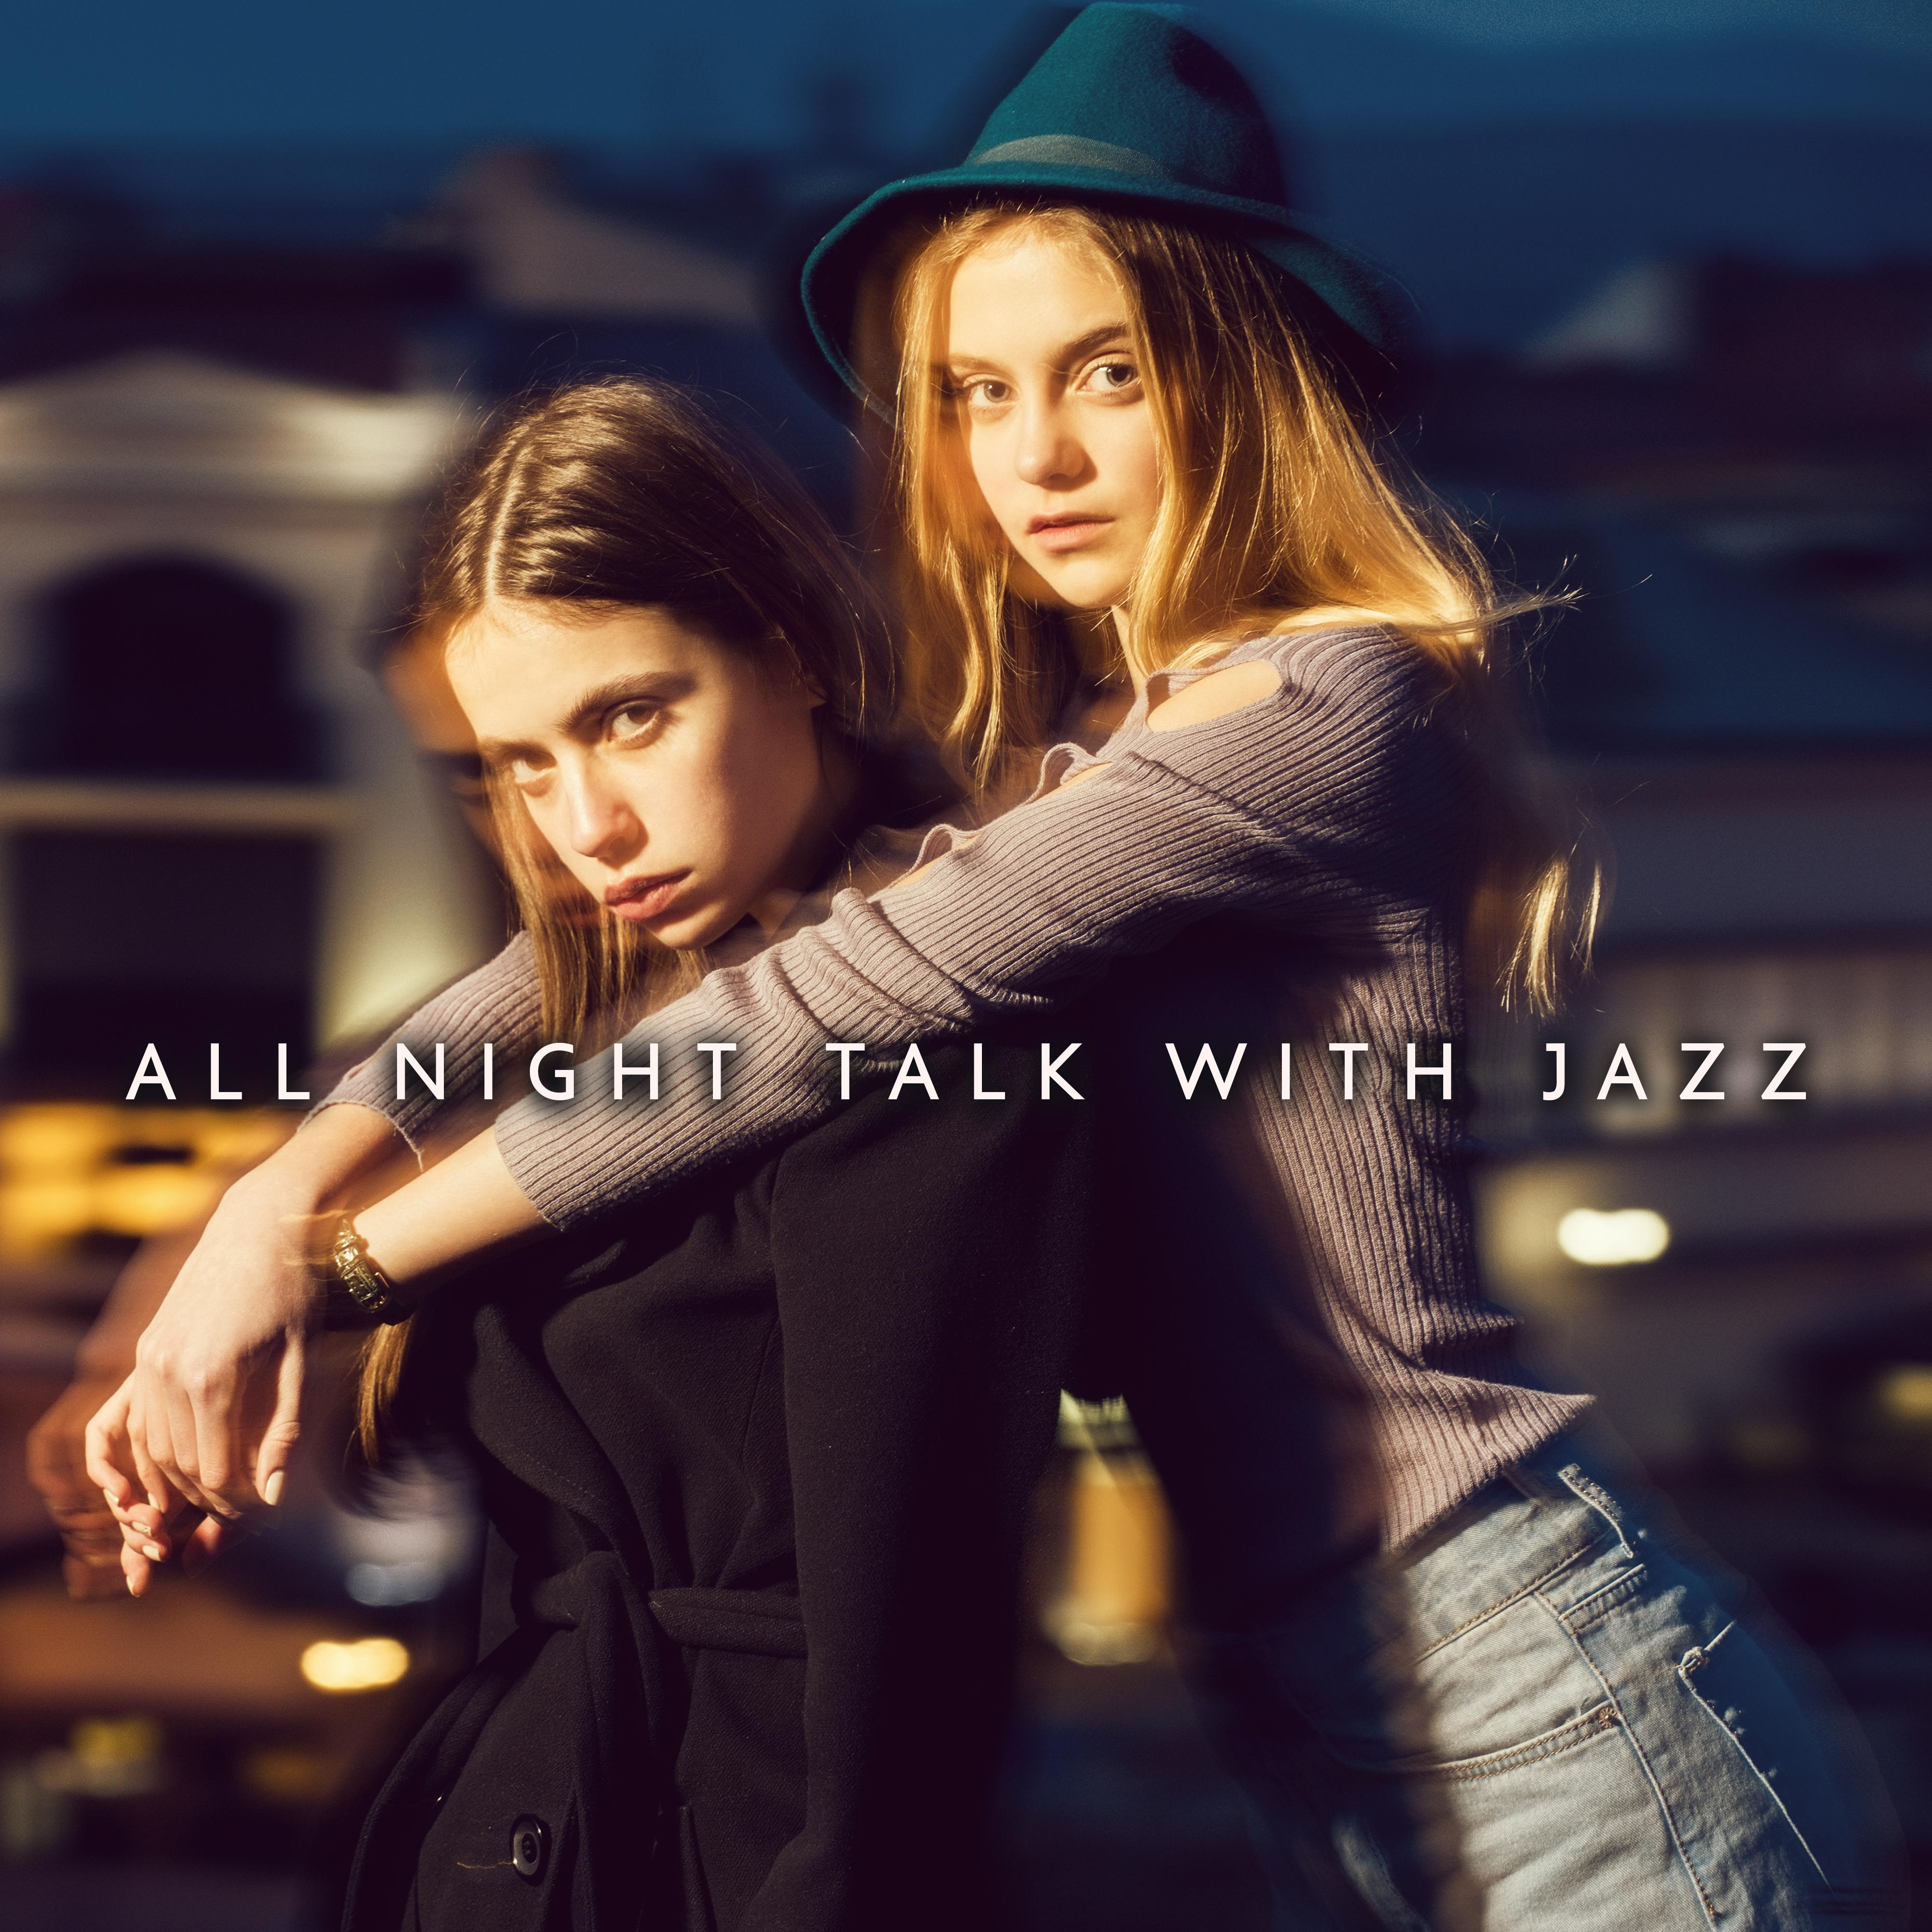 All Night Talk with Jazz: 15 Background Smooth Jazz 2019 Songs for Meeting with Best Friends